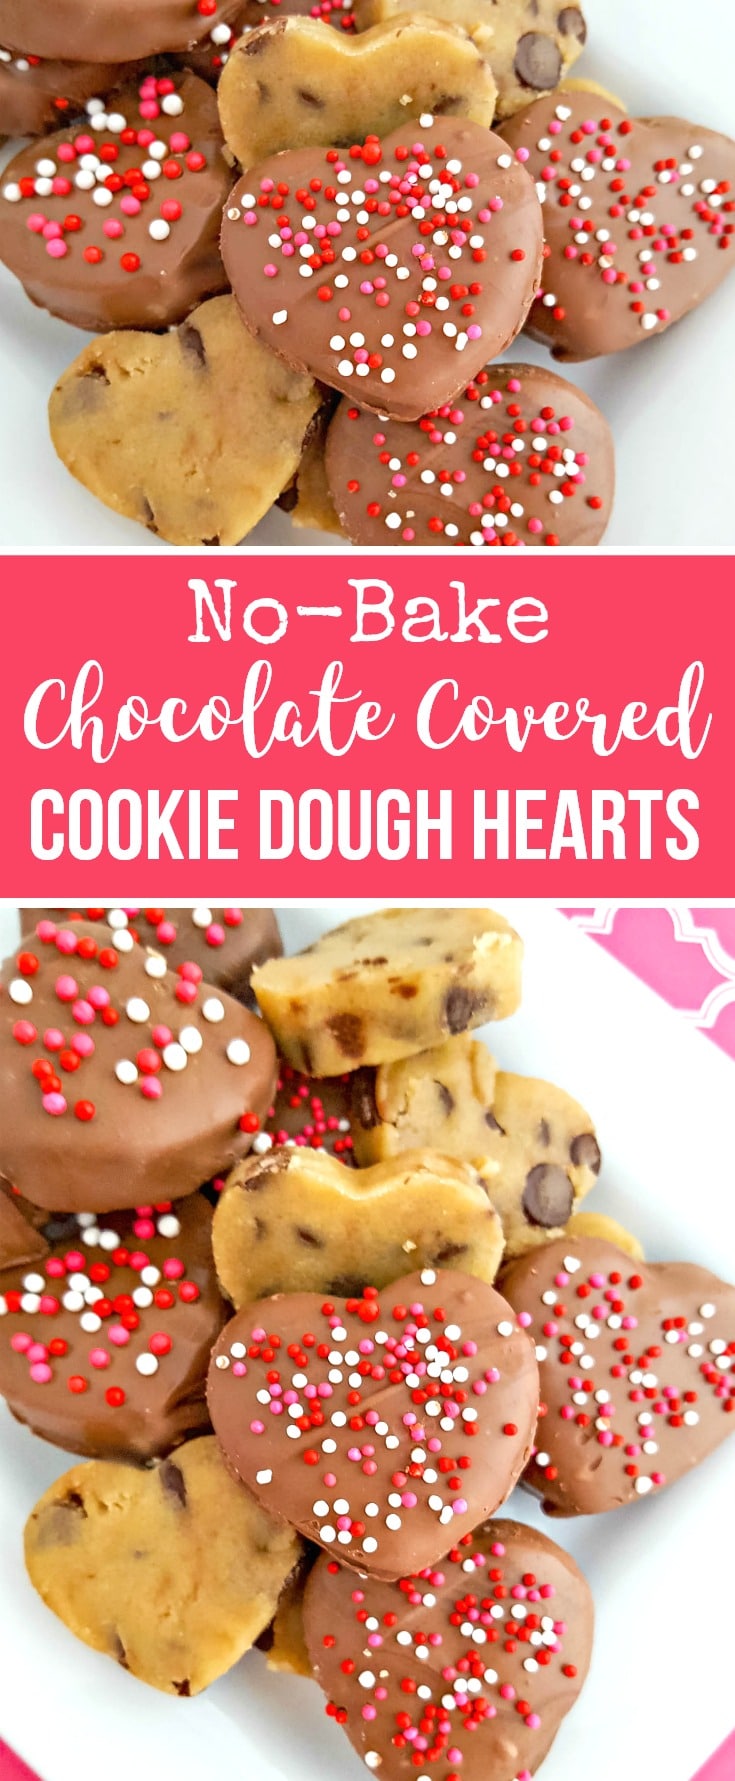 No-Bake Chocolate Covered Cookie Dough Hearts